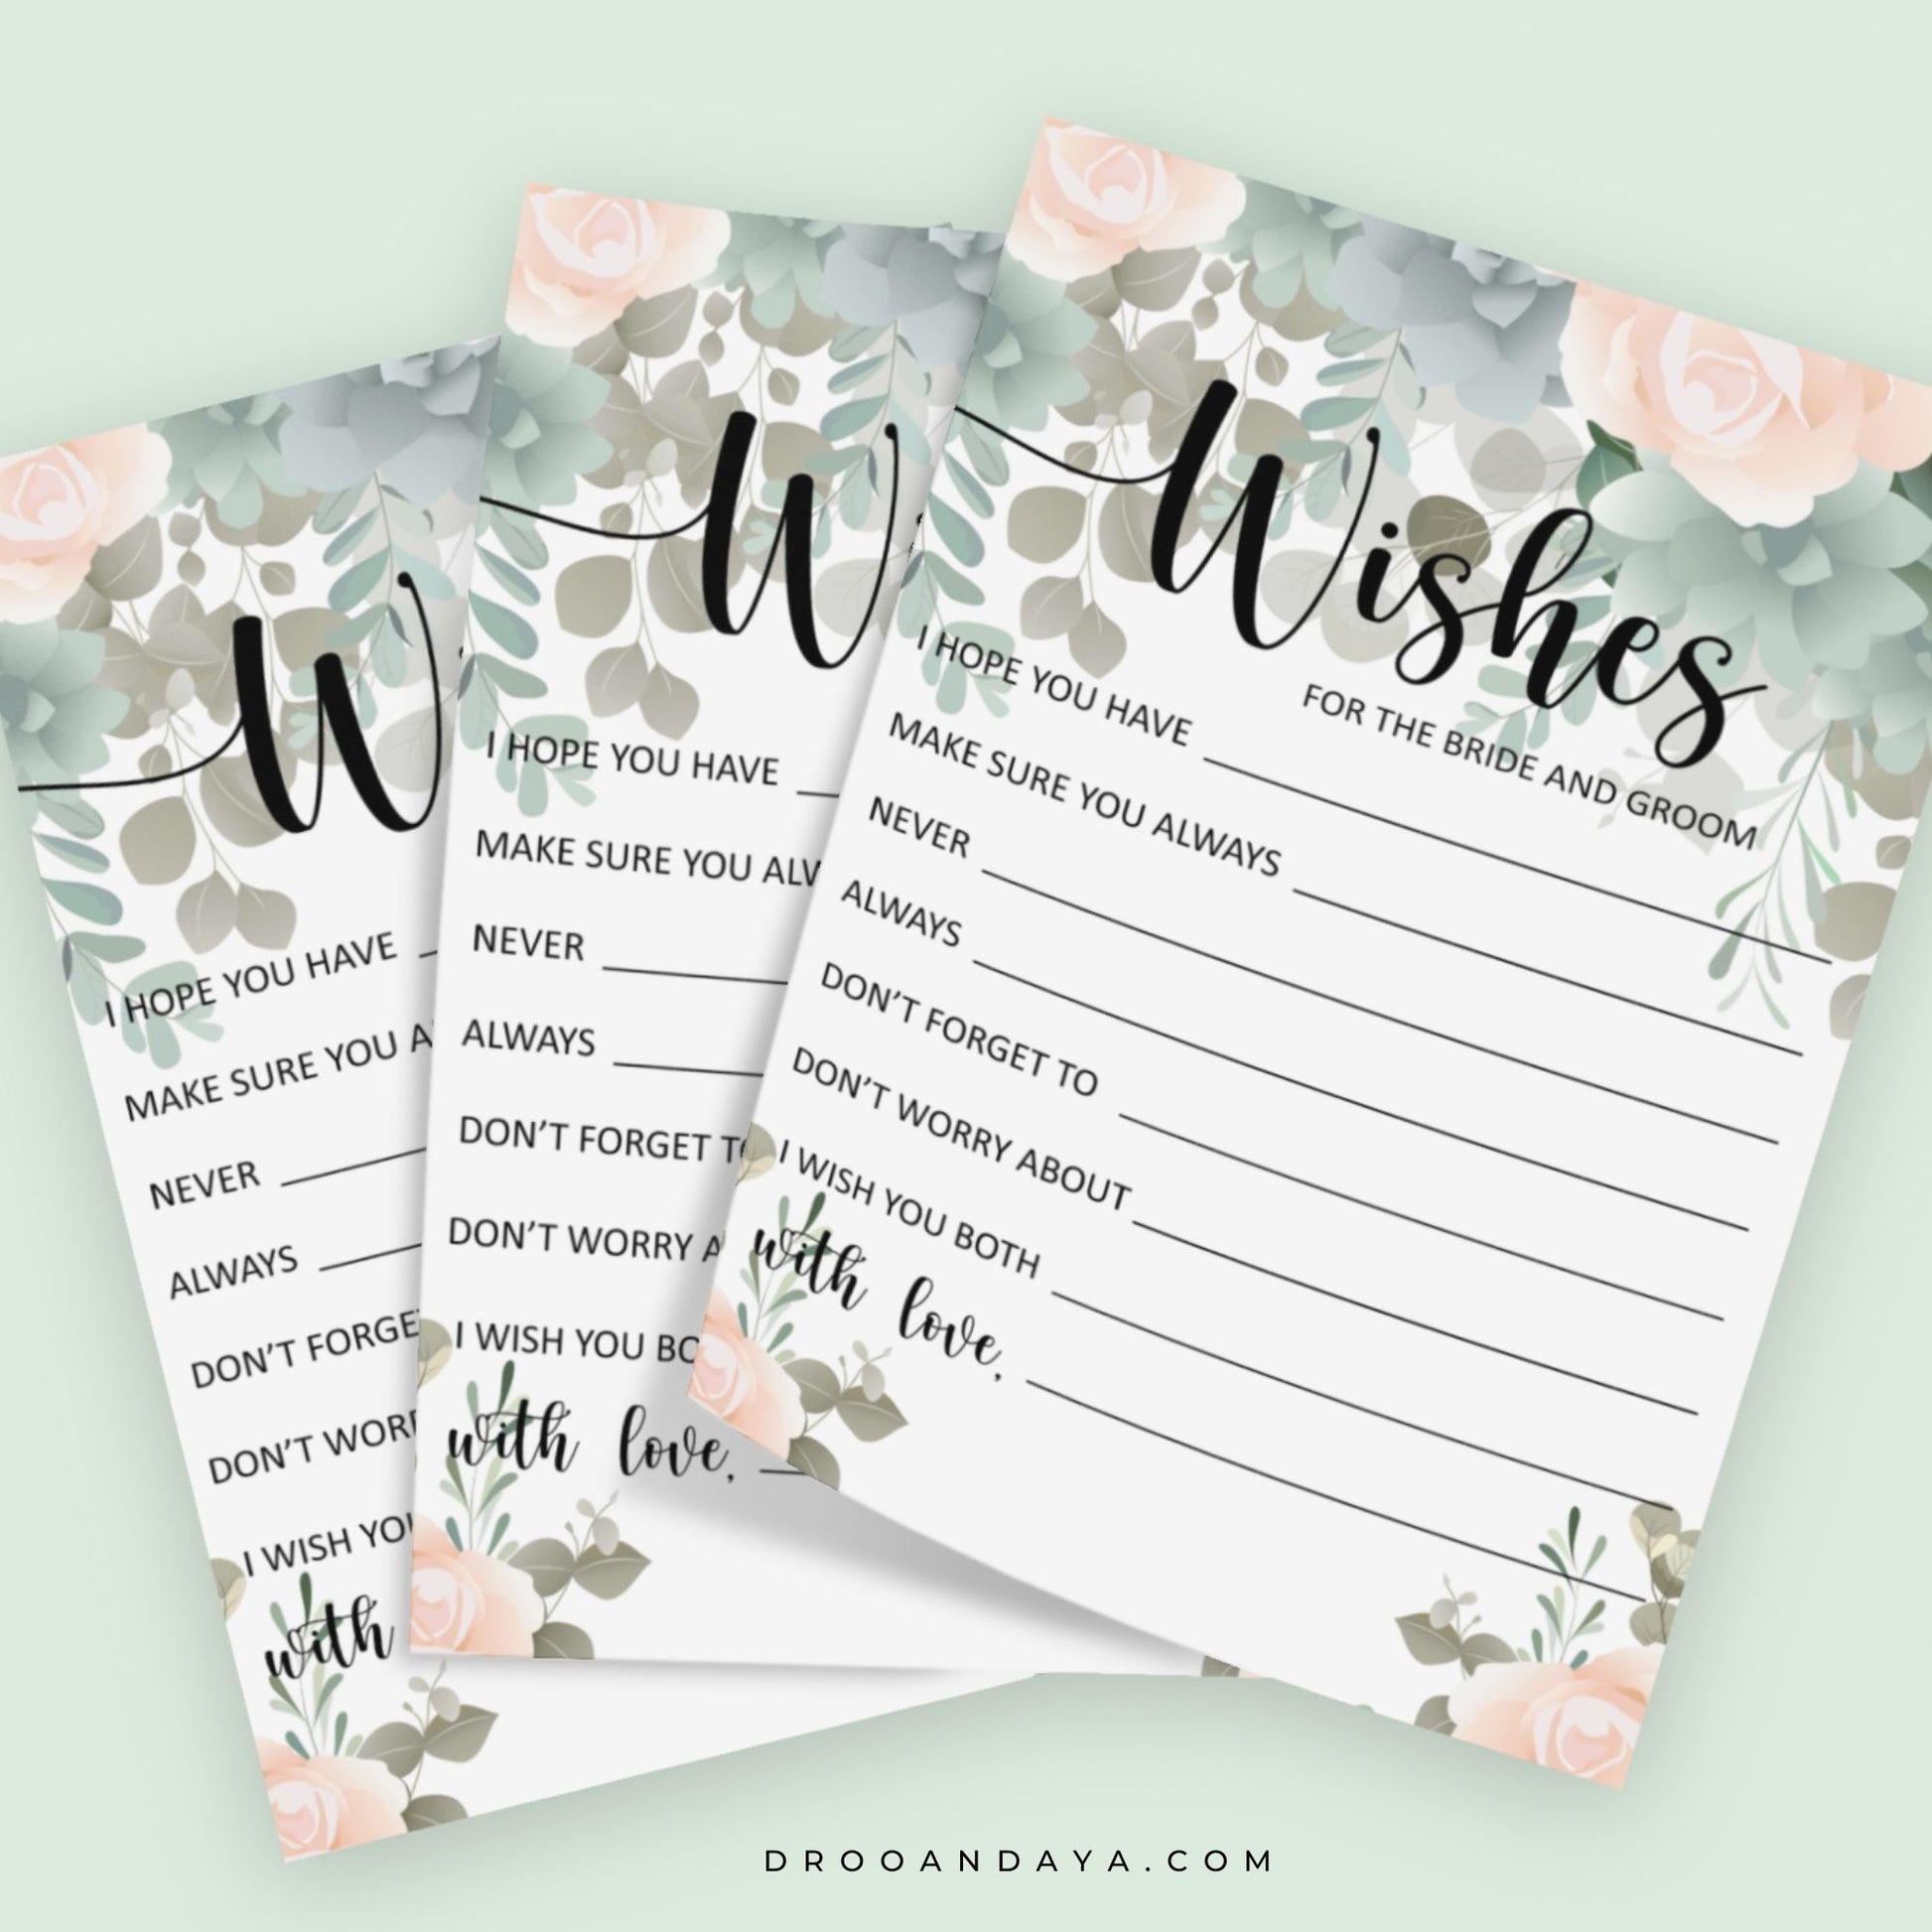 Wedding Advice Cards for the Bride and Groom Floral Theme - Droo & Aya